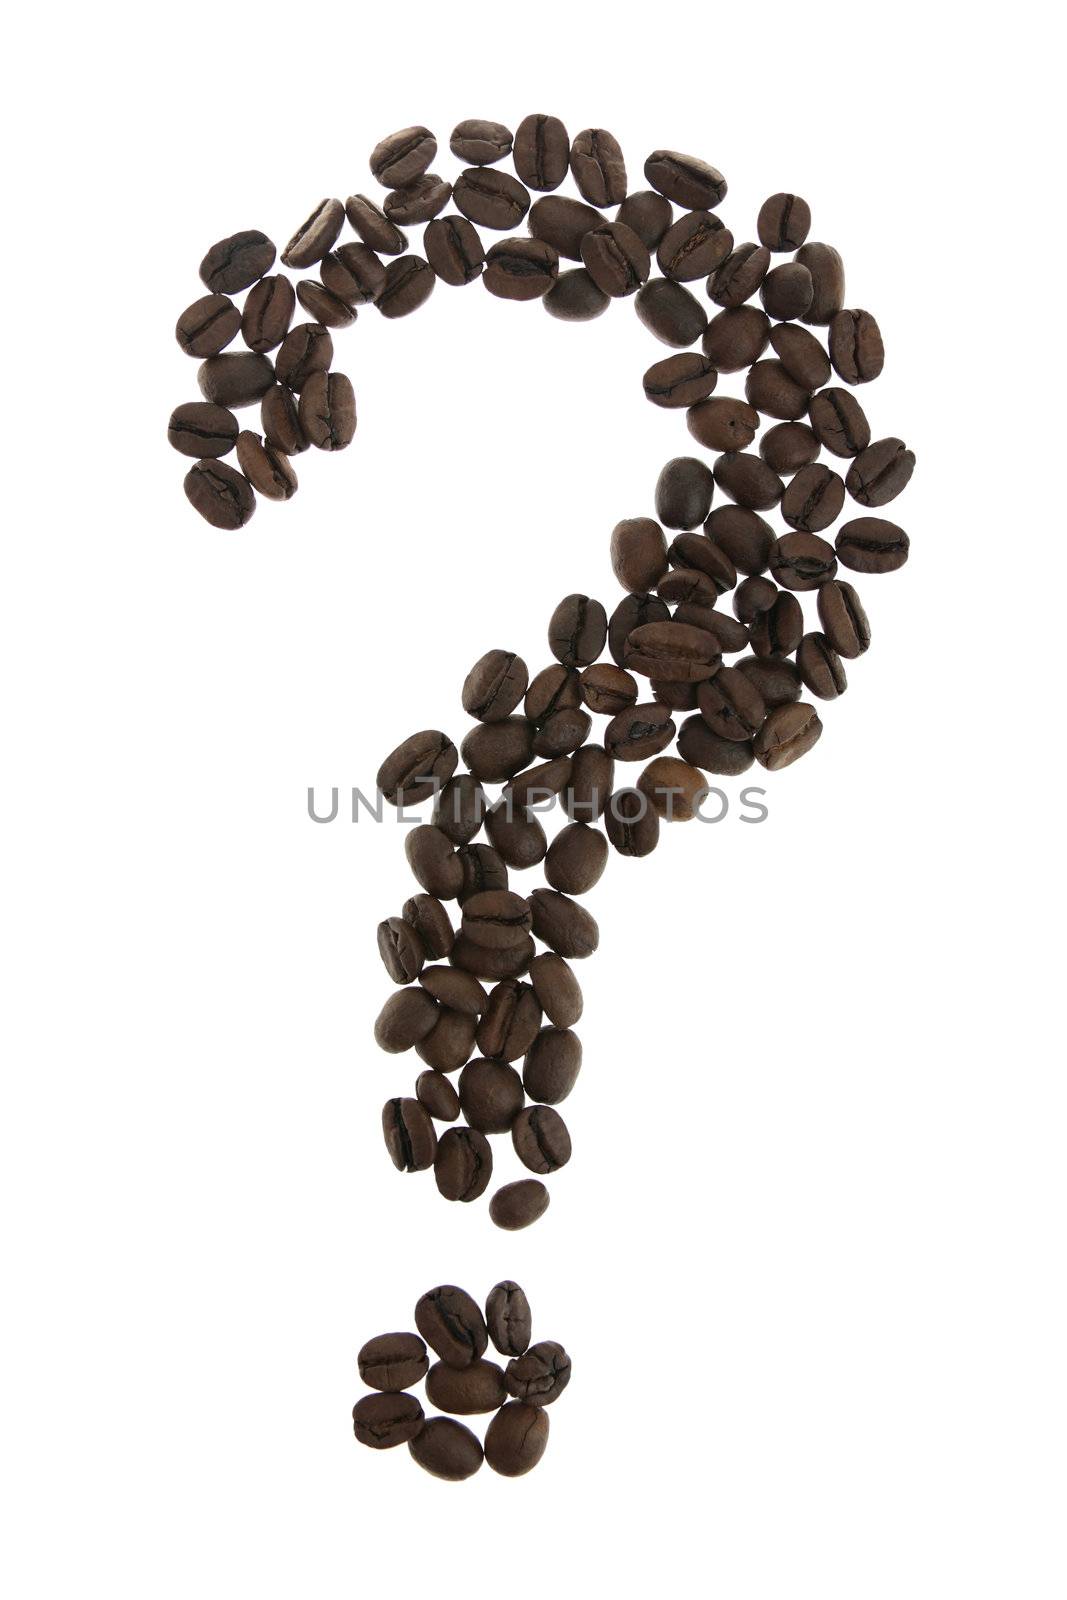 Coffe question mark by BDS